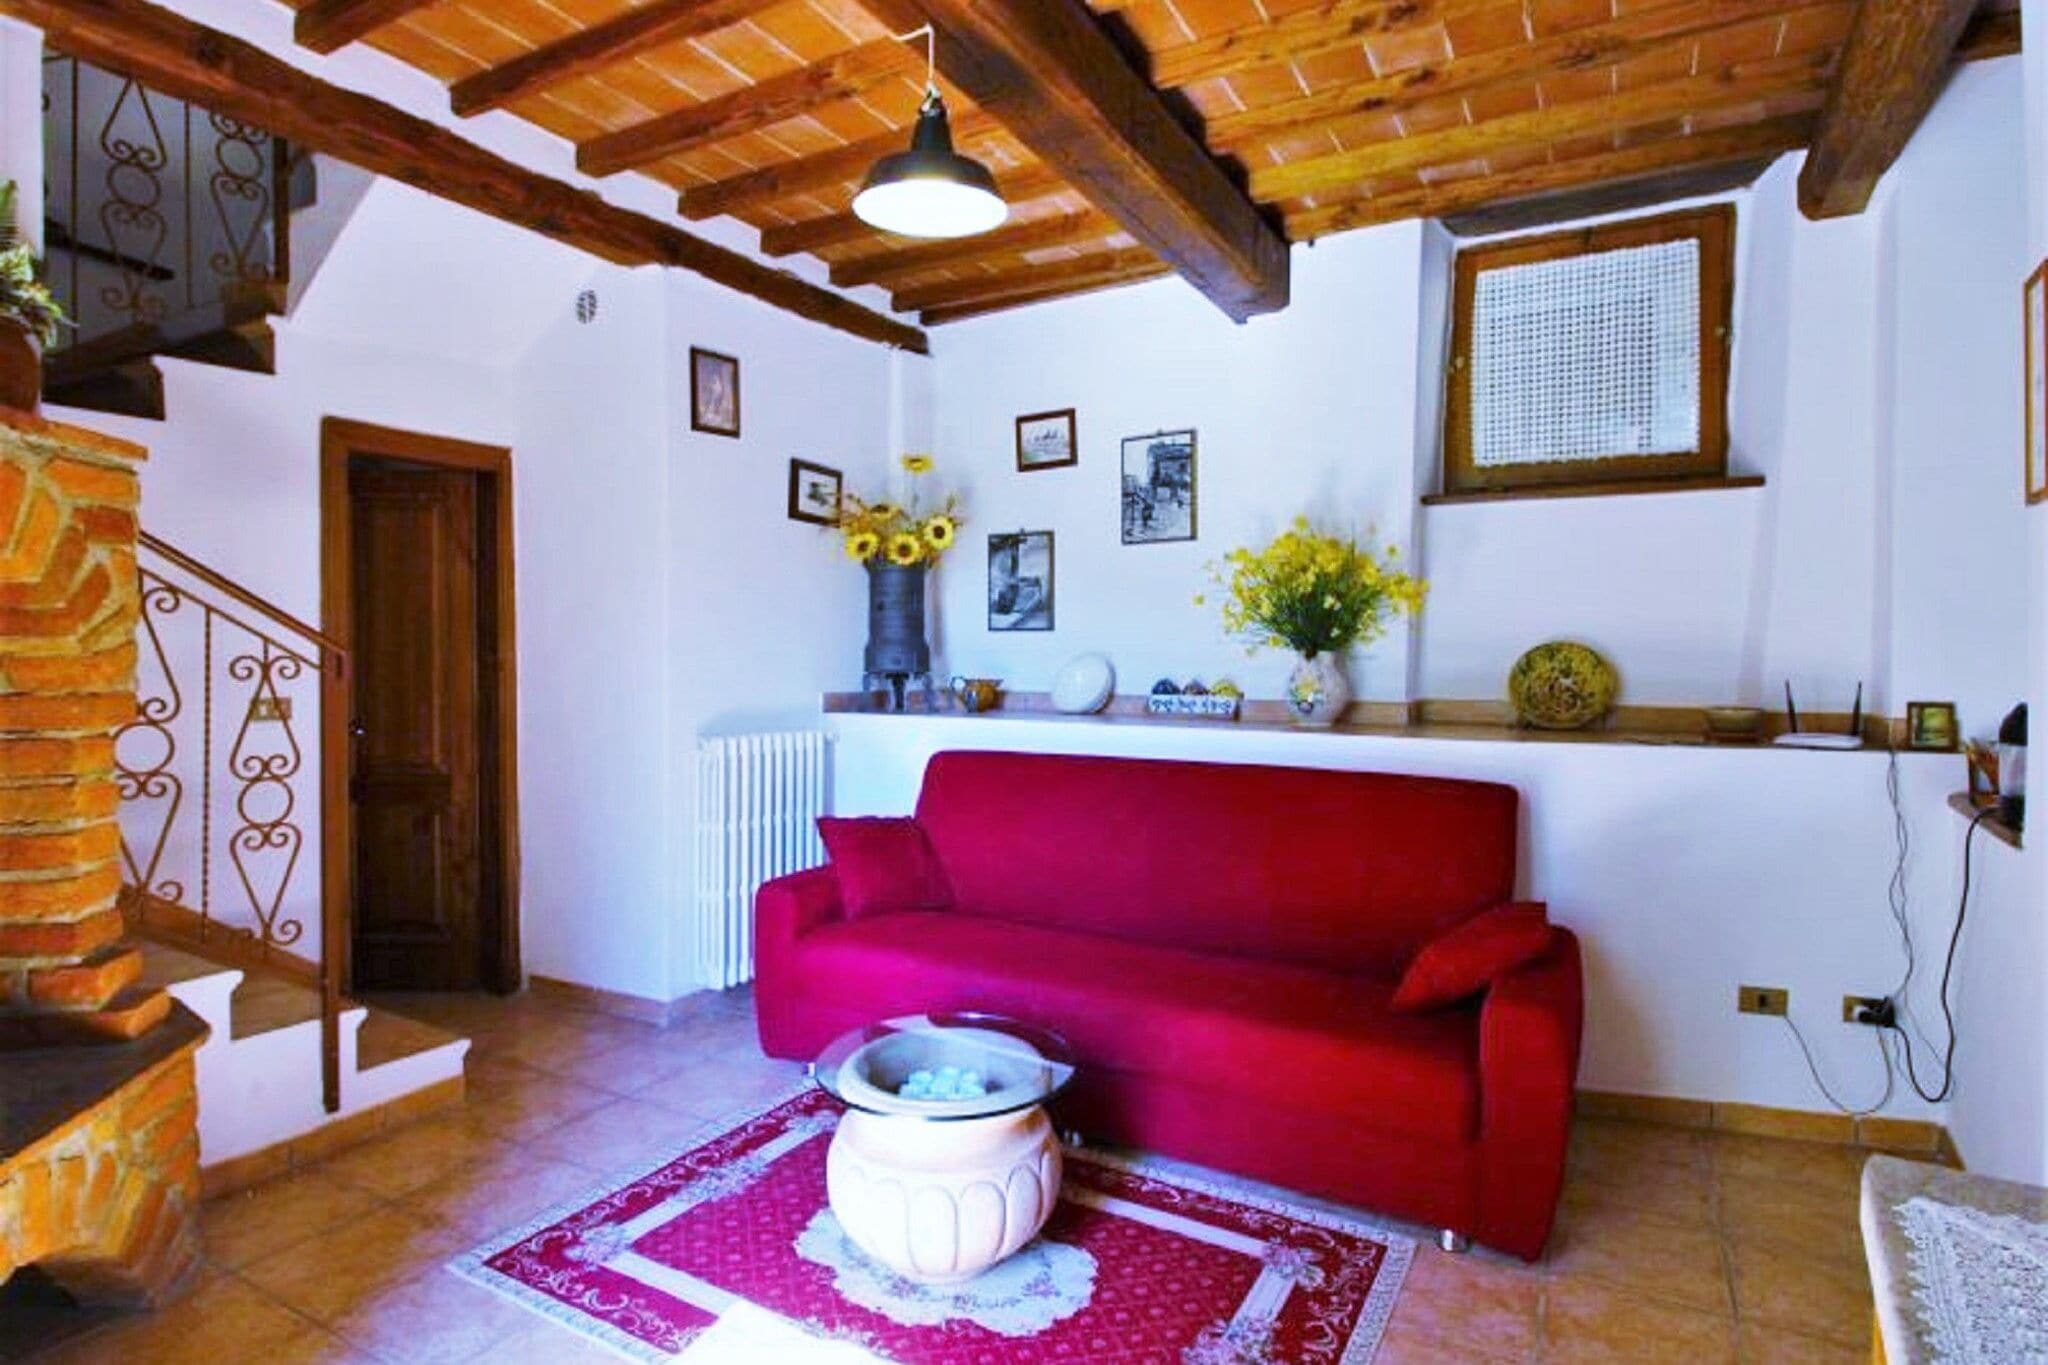 Charming holiday home in Castiglion Fiorentino with pool